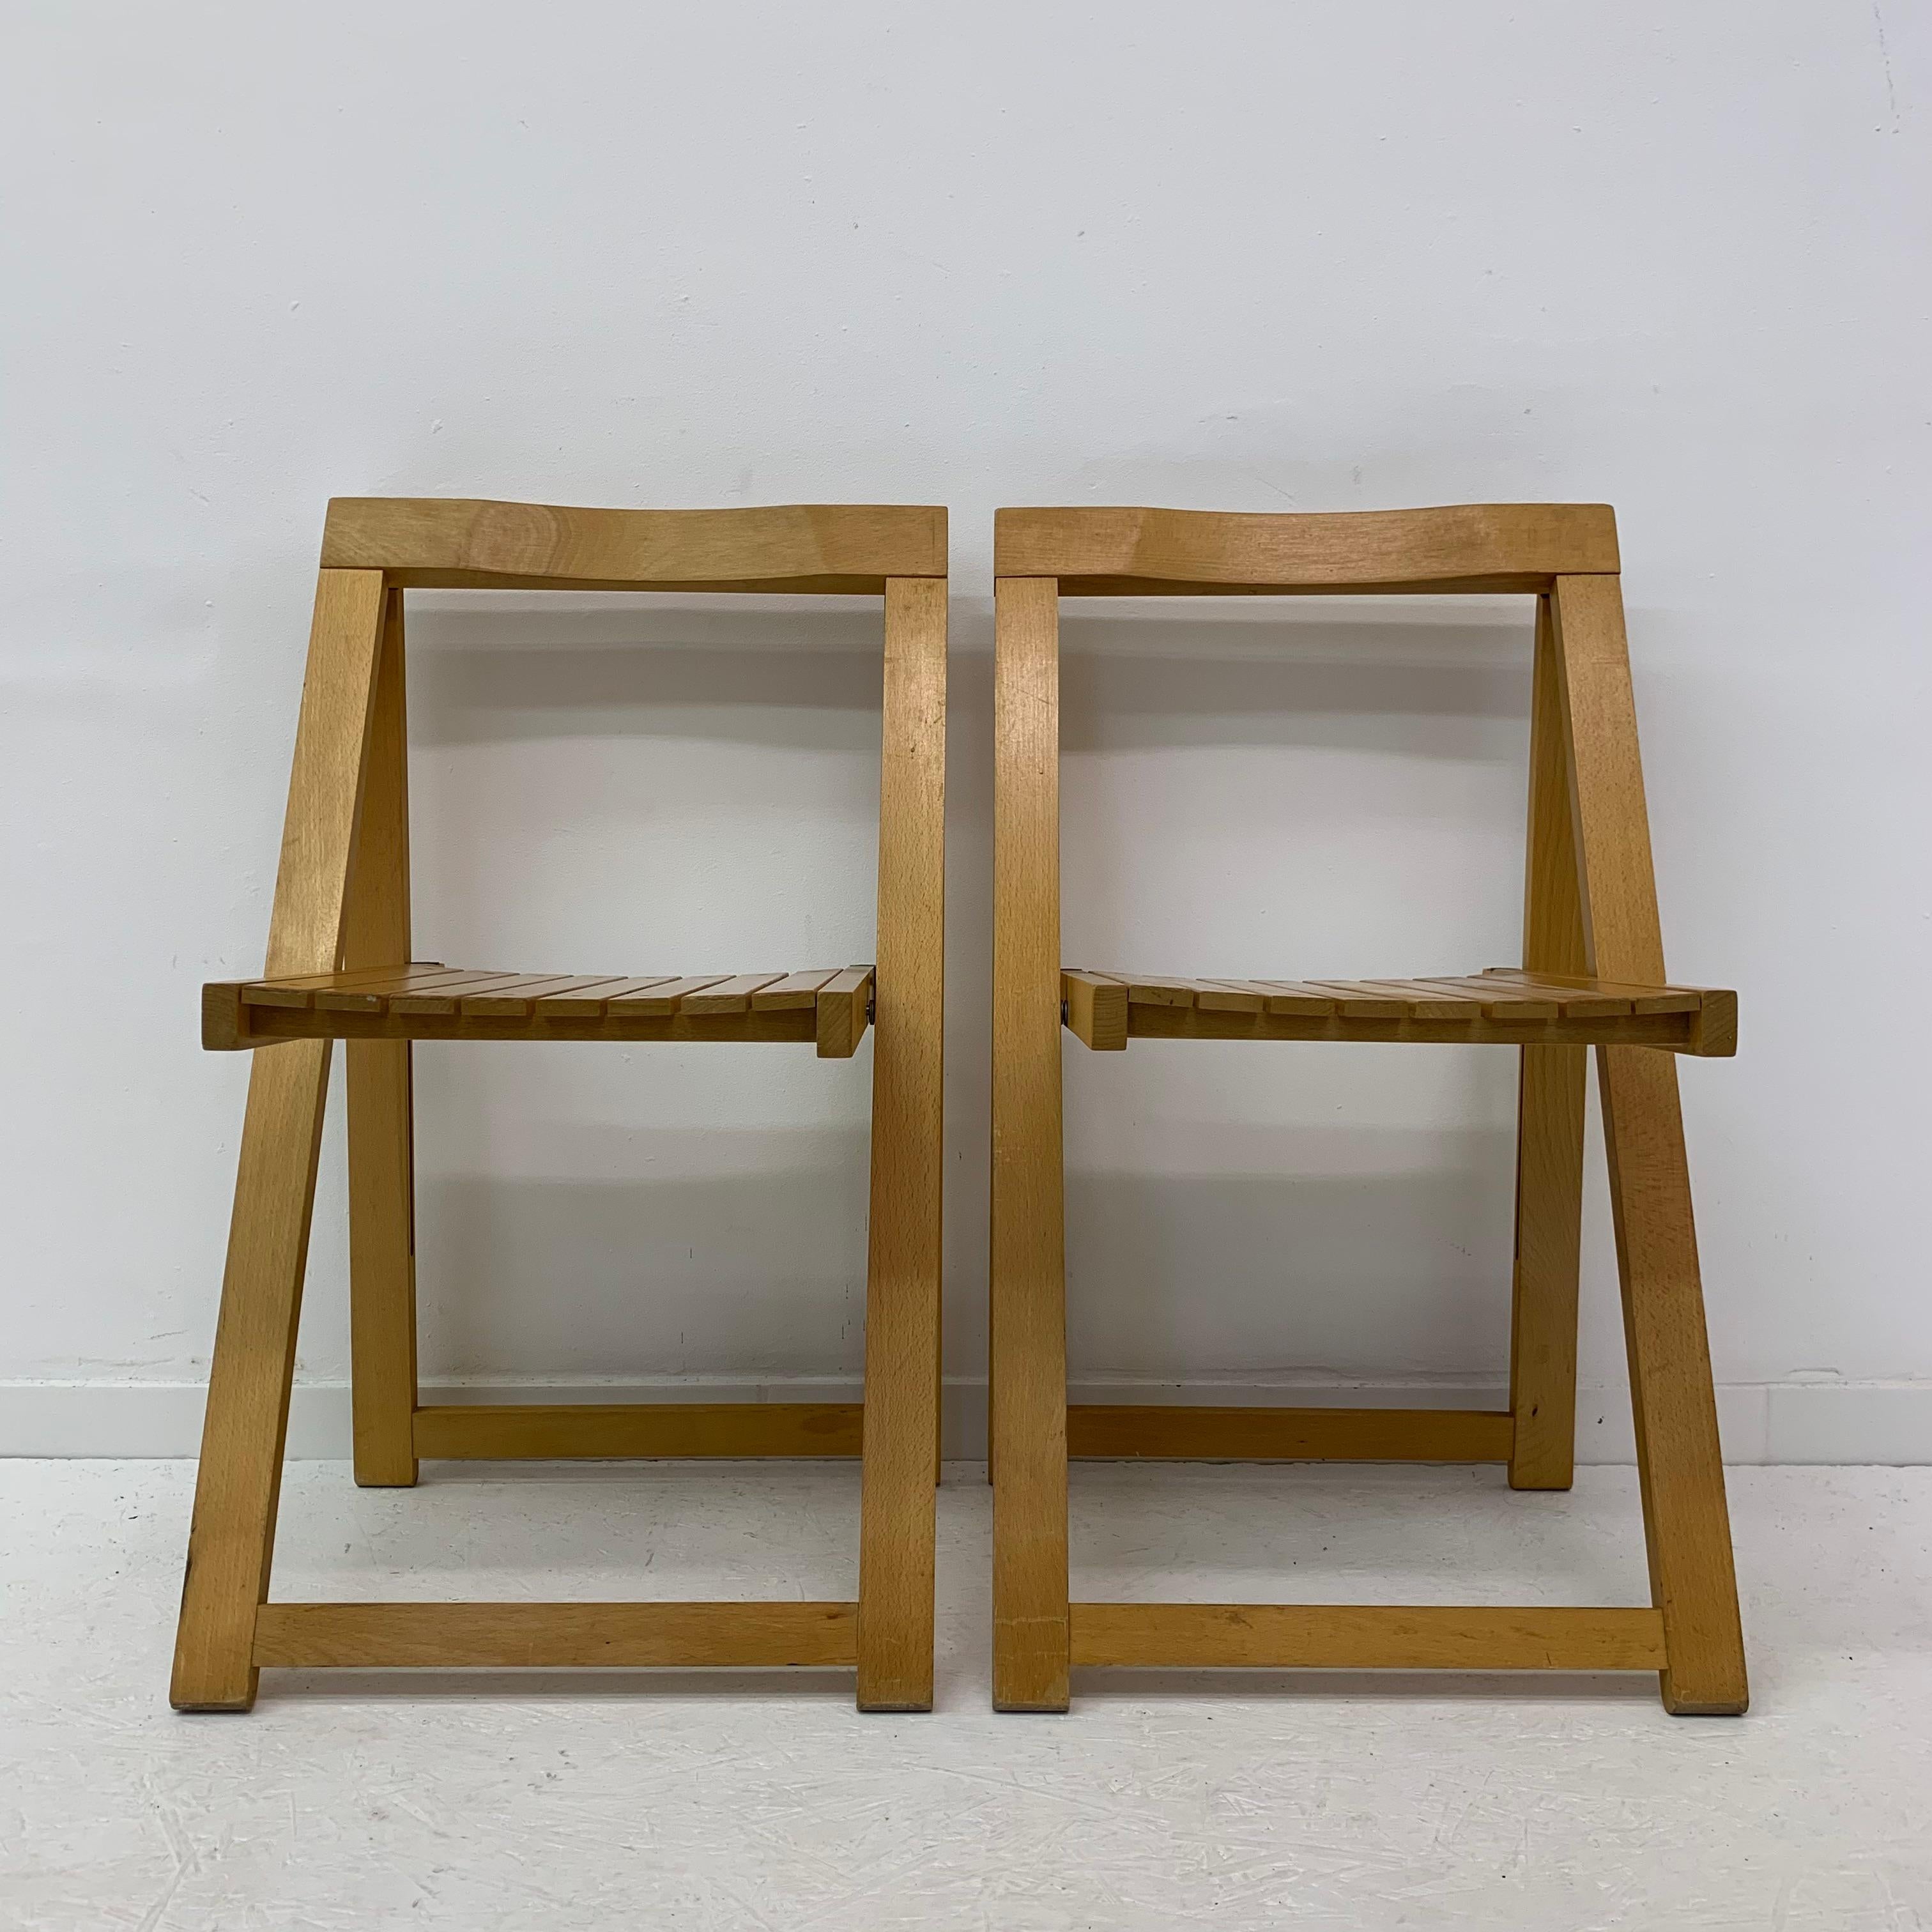 Set of 2 Aldo Jacober for Alberto Bazzani folding chairs, 1960’s For Sale 3